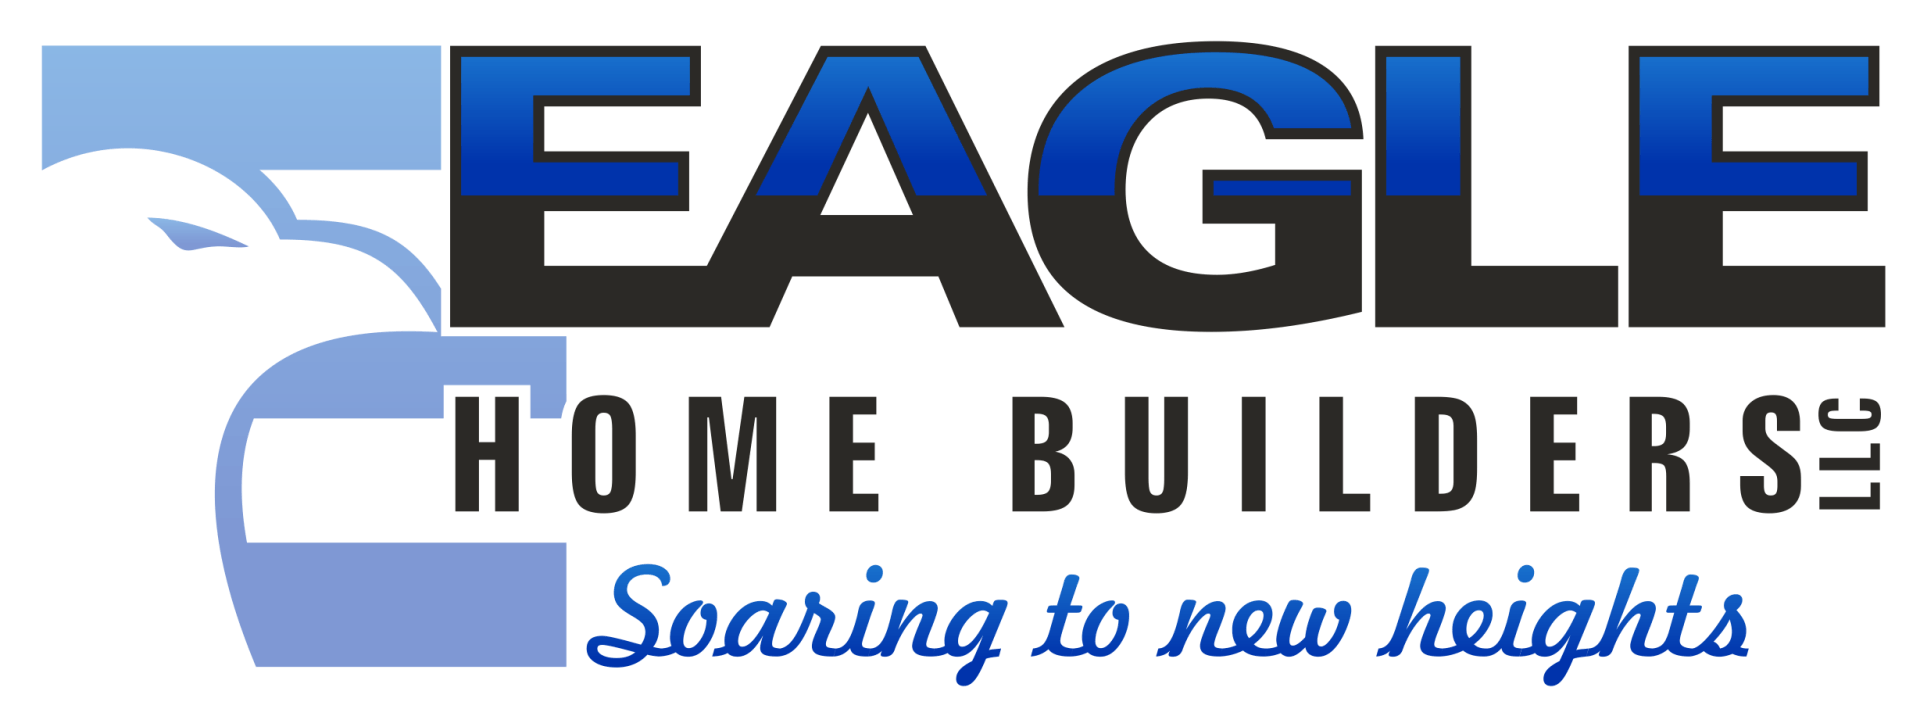 Eagle Home Builders